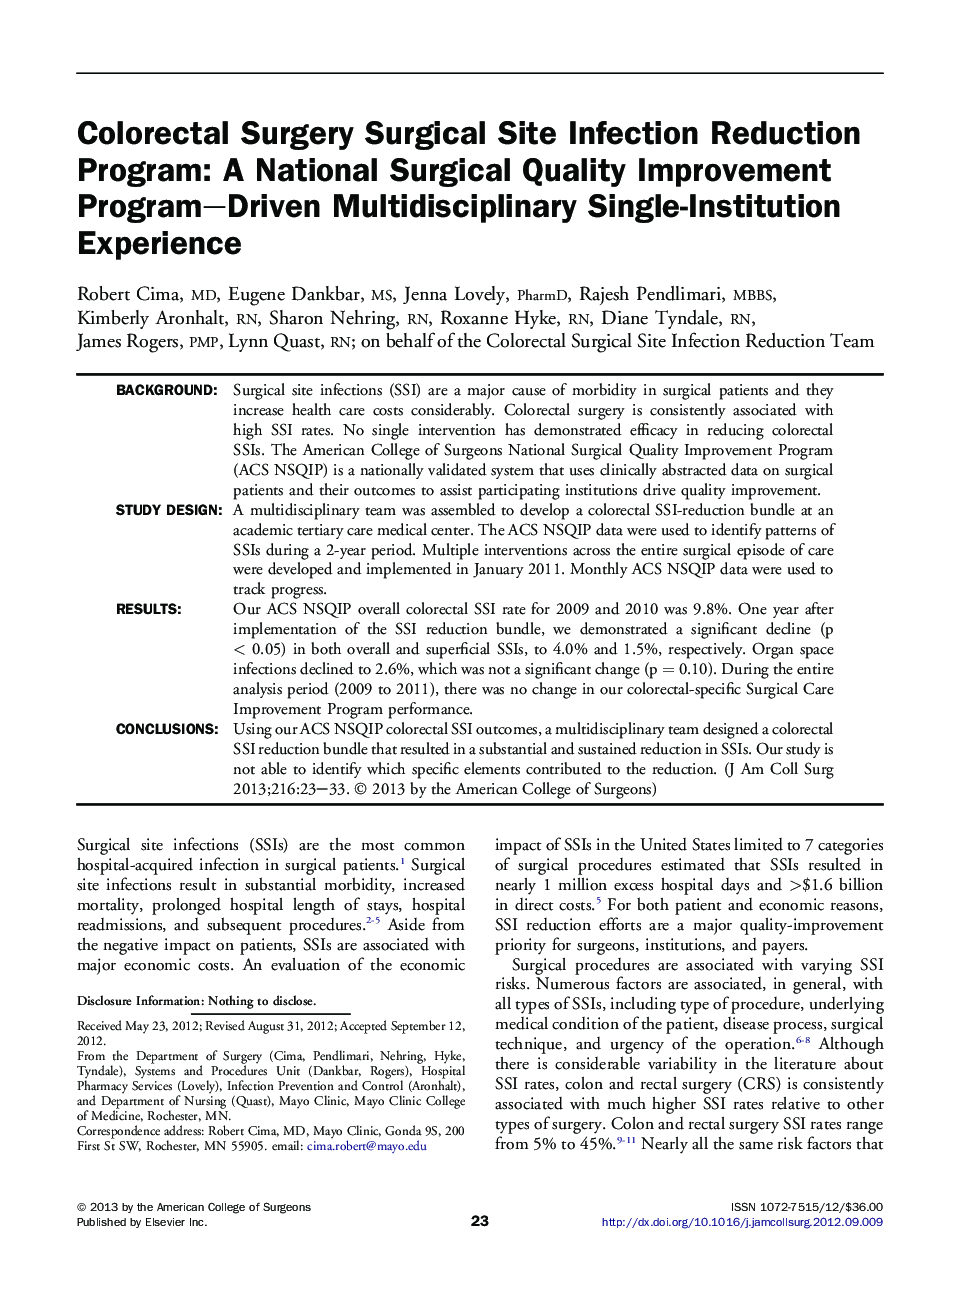 Colorectal Surgery Surgical Site Infection Reduction Program: A National Surgical Quality Improvement Program–Driven Multidisciplinary Single-Institution Experience 